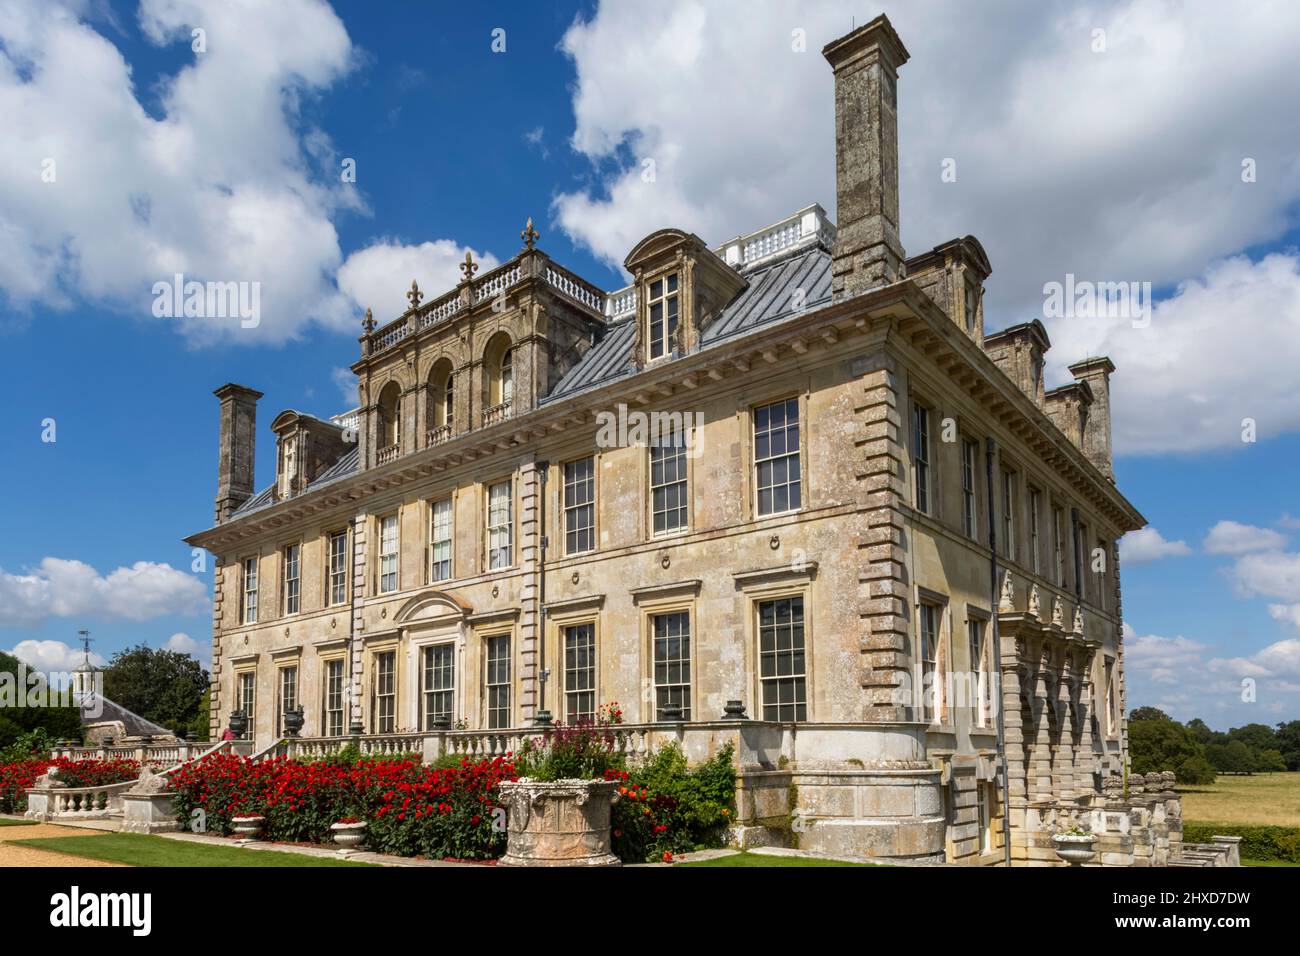 England, Dorset, Wimborne Minster, Kingston Lacey Country House dated 1665 Stock Photo